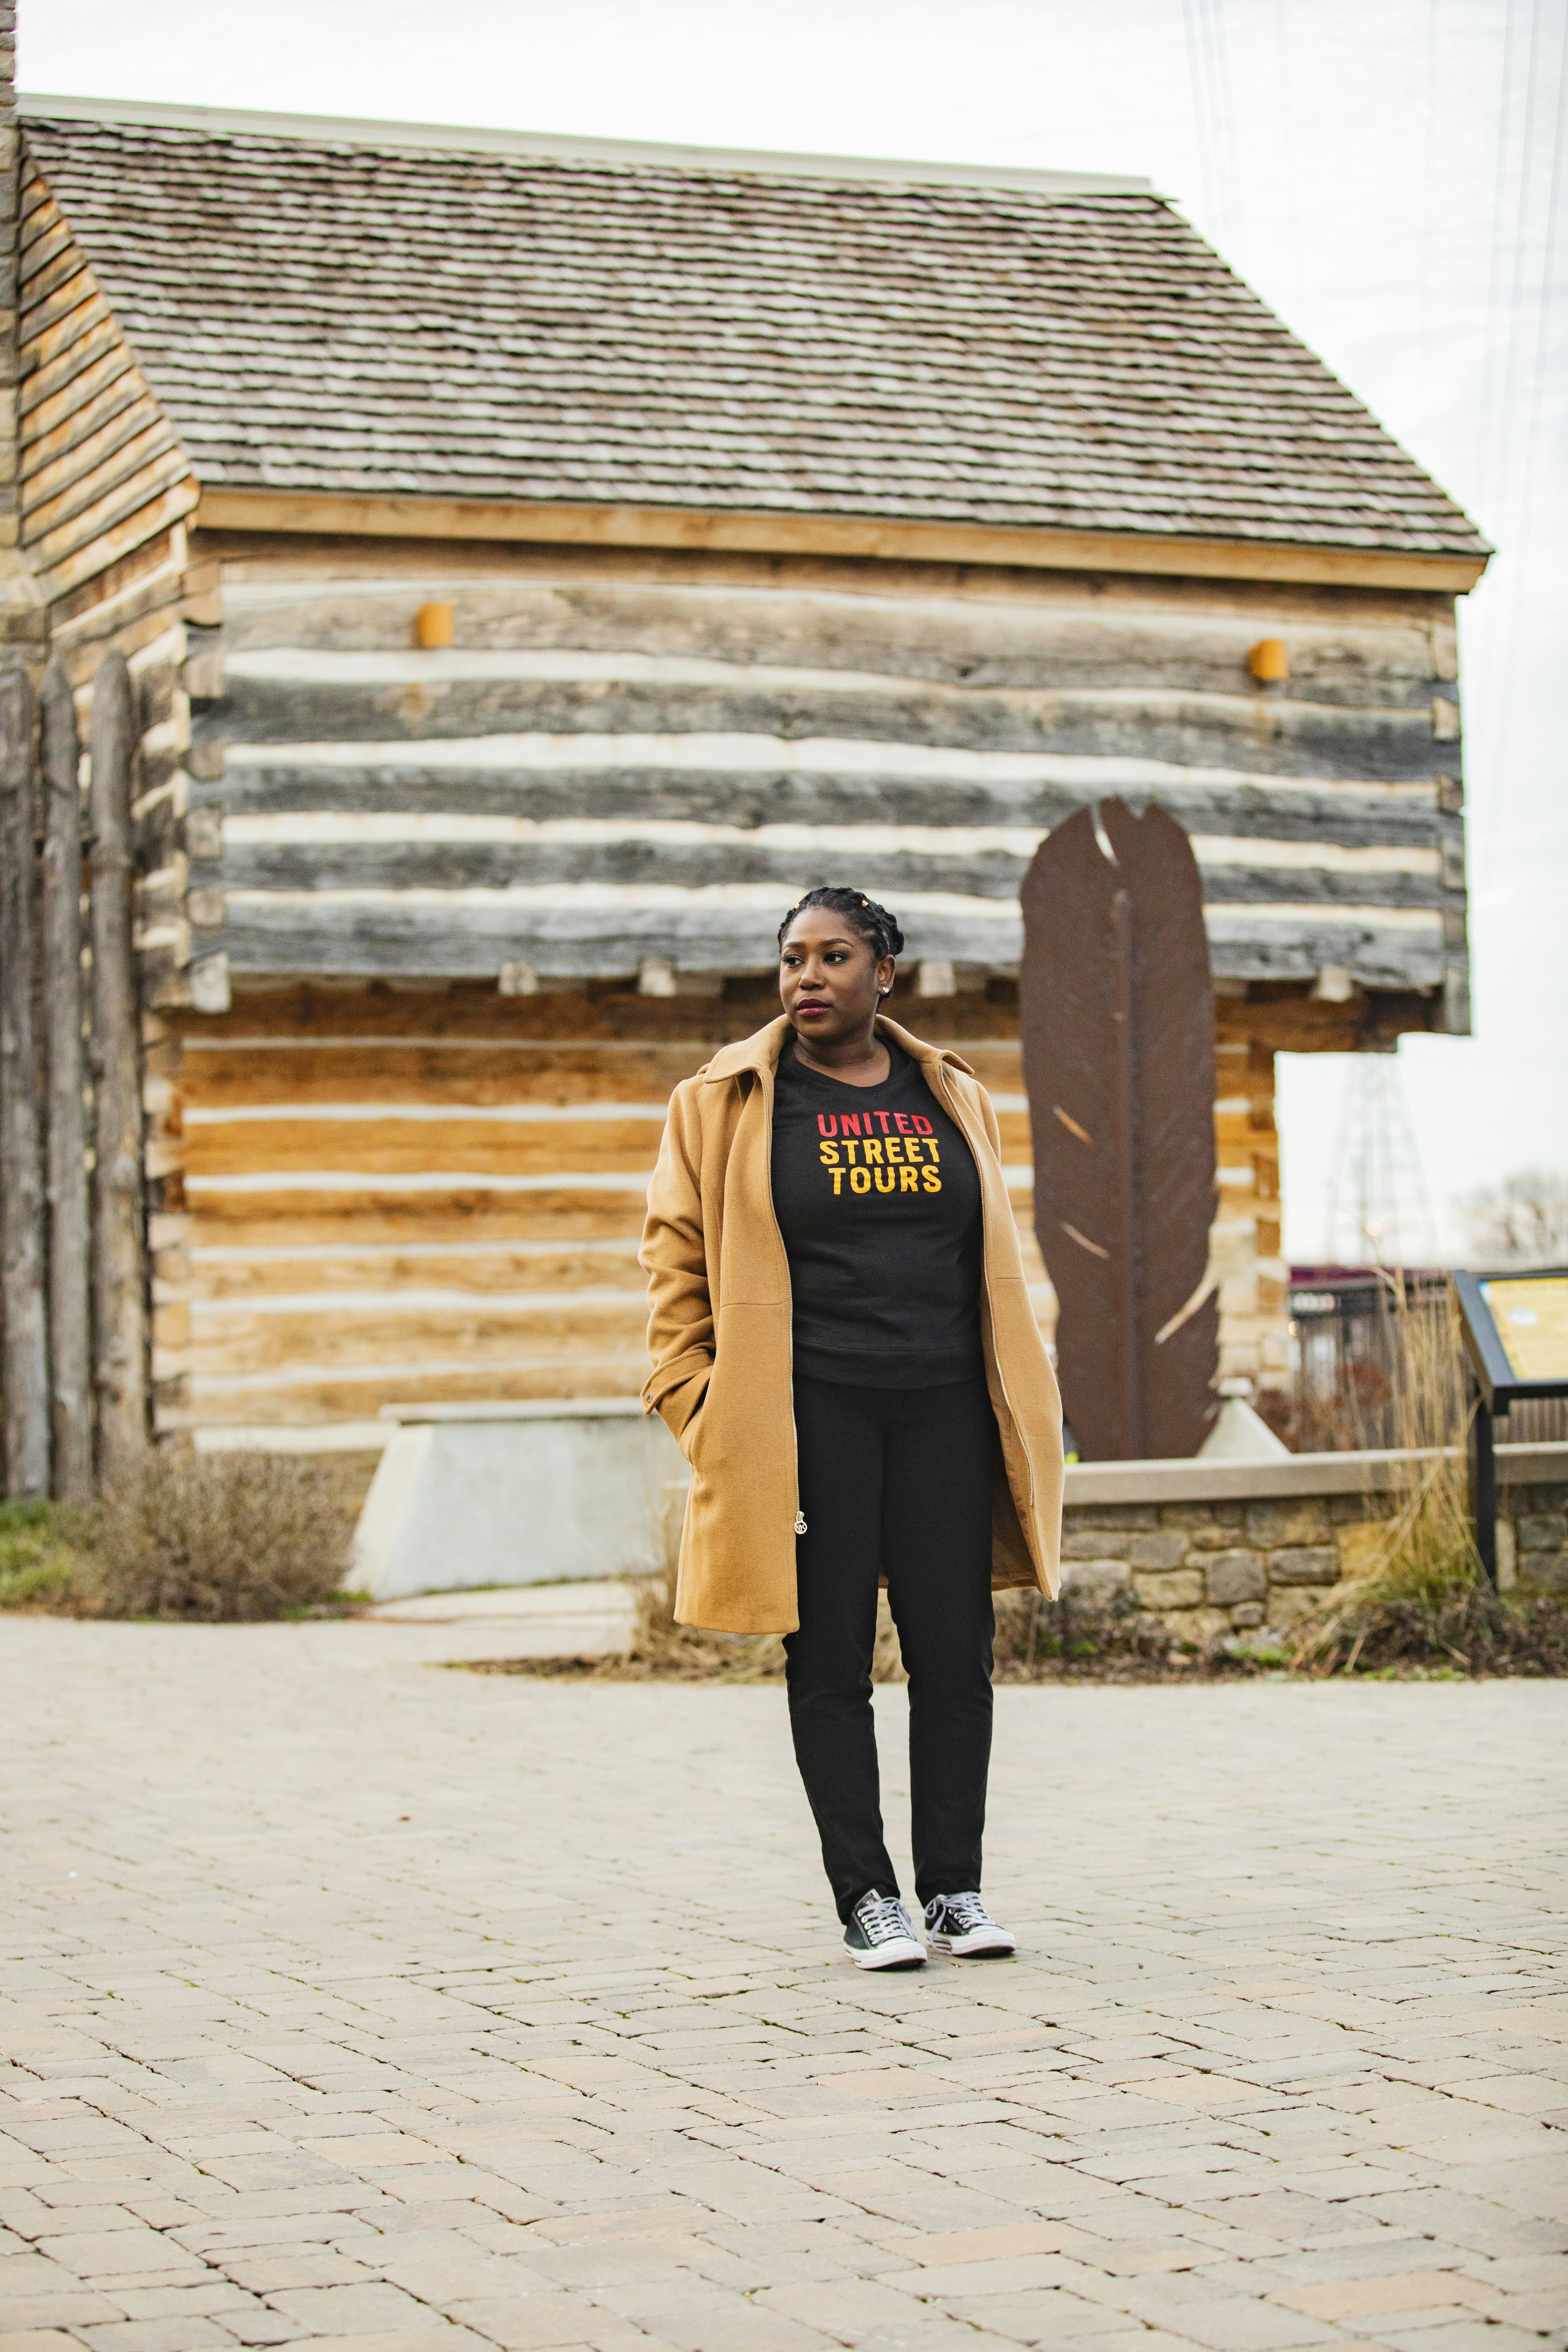 A woman stands in front of a wooden cabin wearing a camel trench coat and a black shirt that says "United Street Tours"